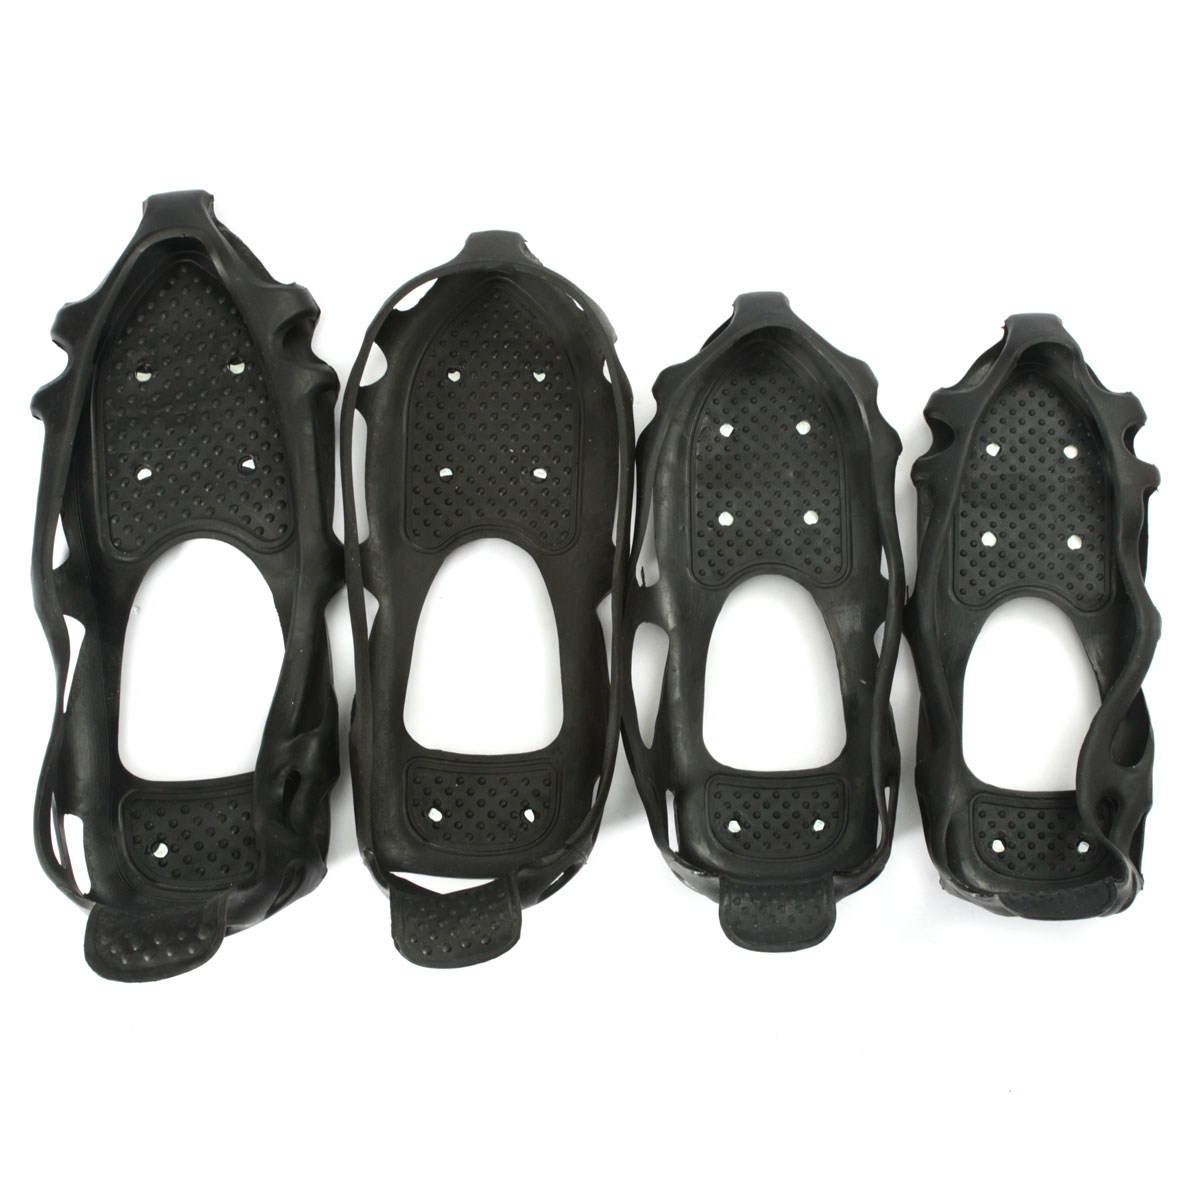 24 Spikes Non-slip Studs Snow Ice Mud Crampons Overshoes Boots Shoe Gripper S-XL от Banggood WW